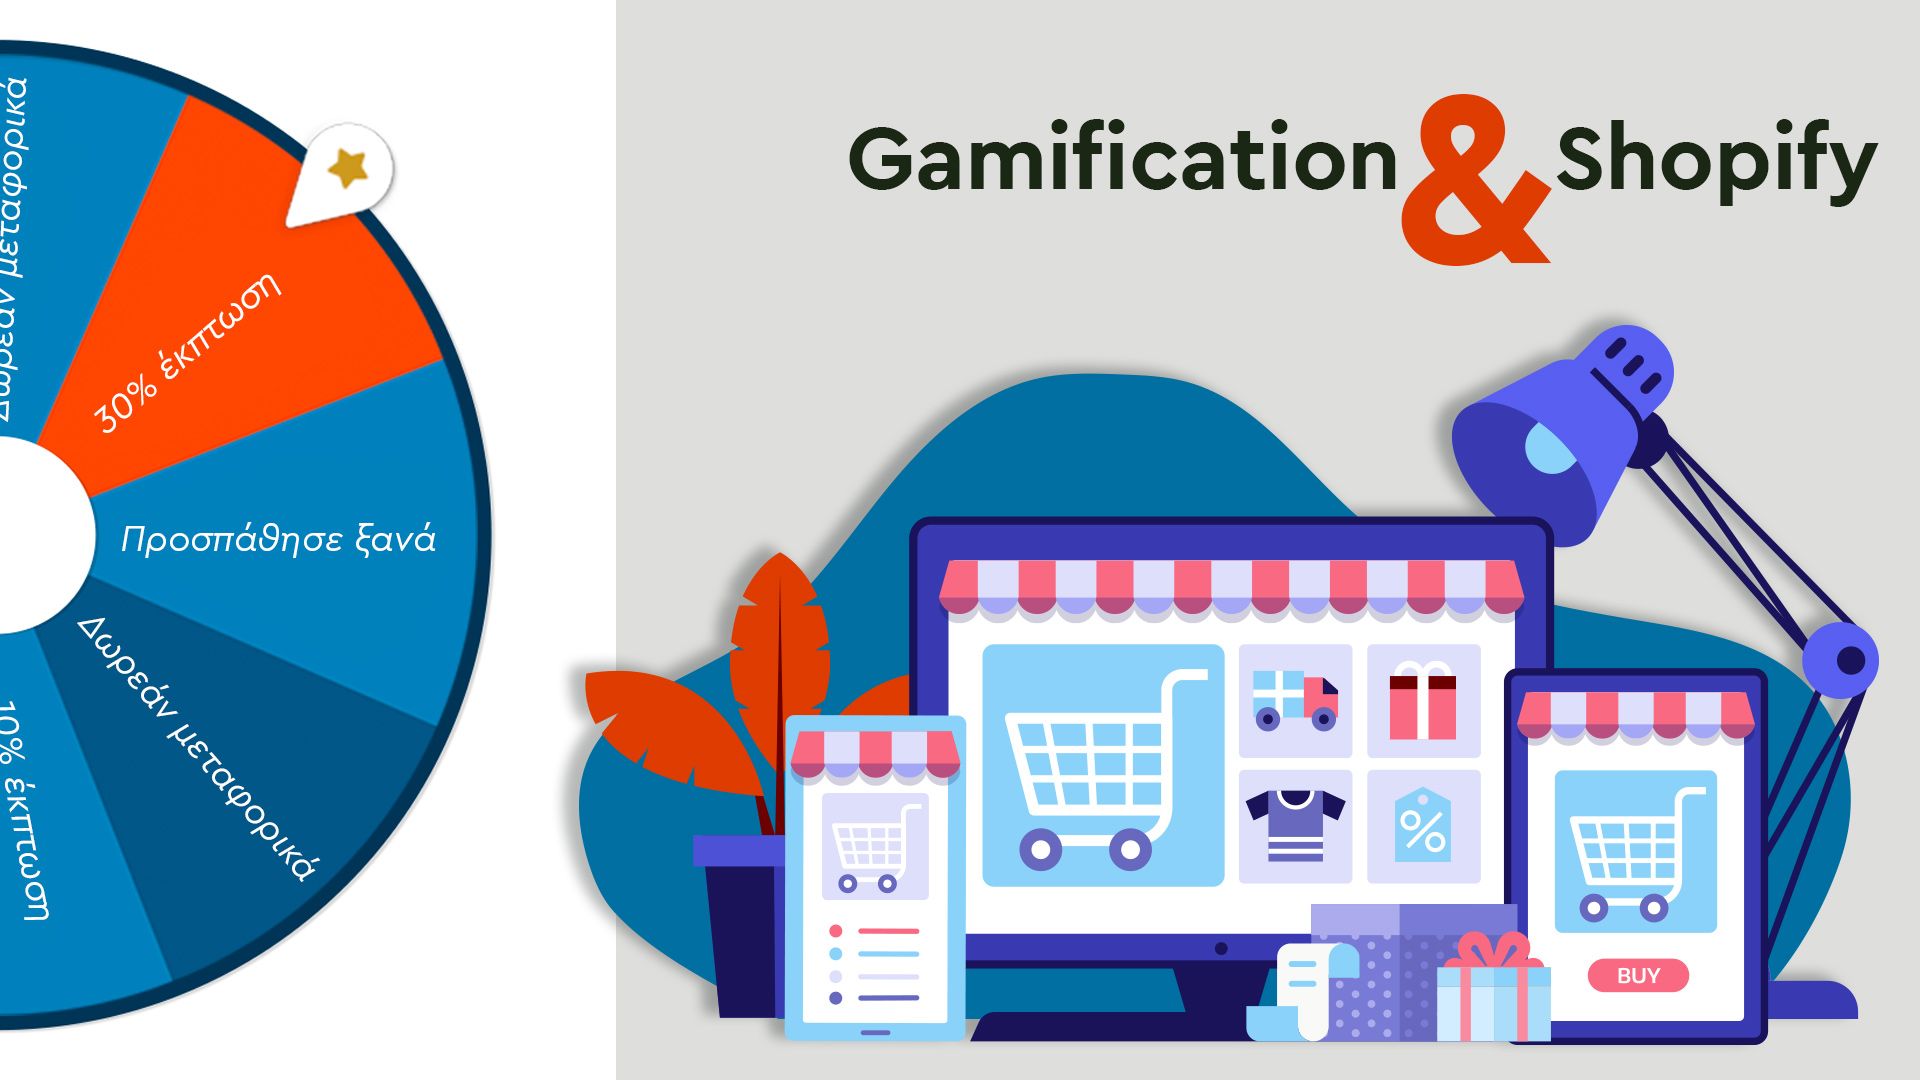 Shopify store graphic - τροχός της τύχης για gamification